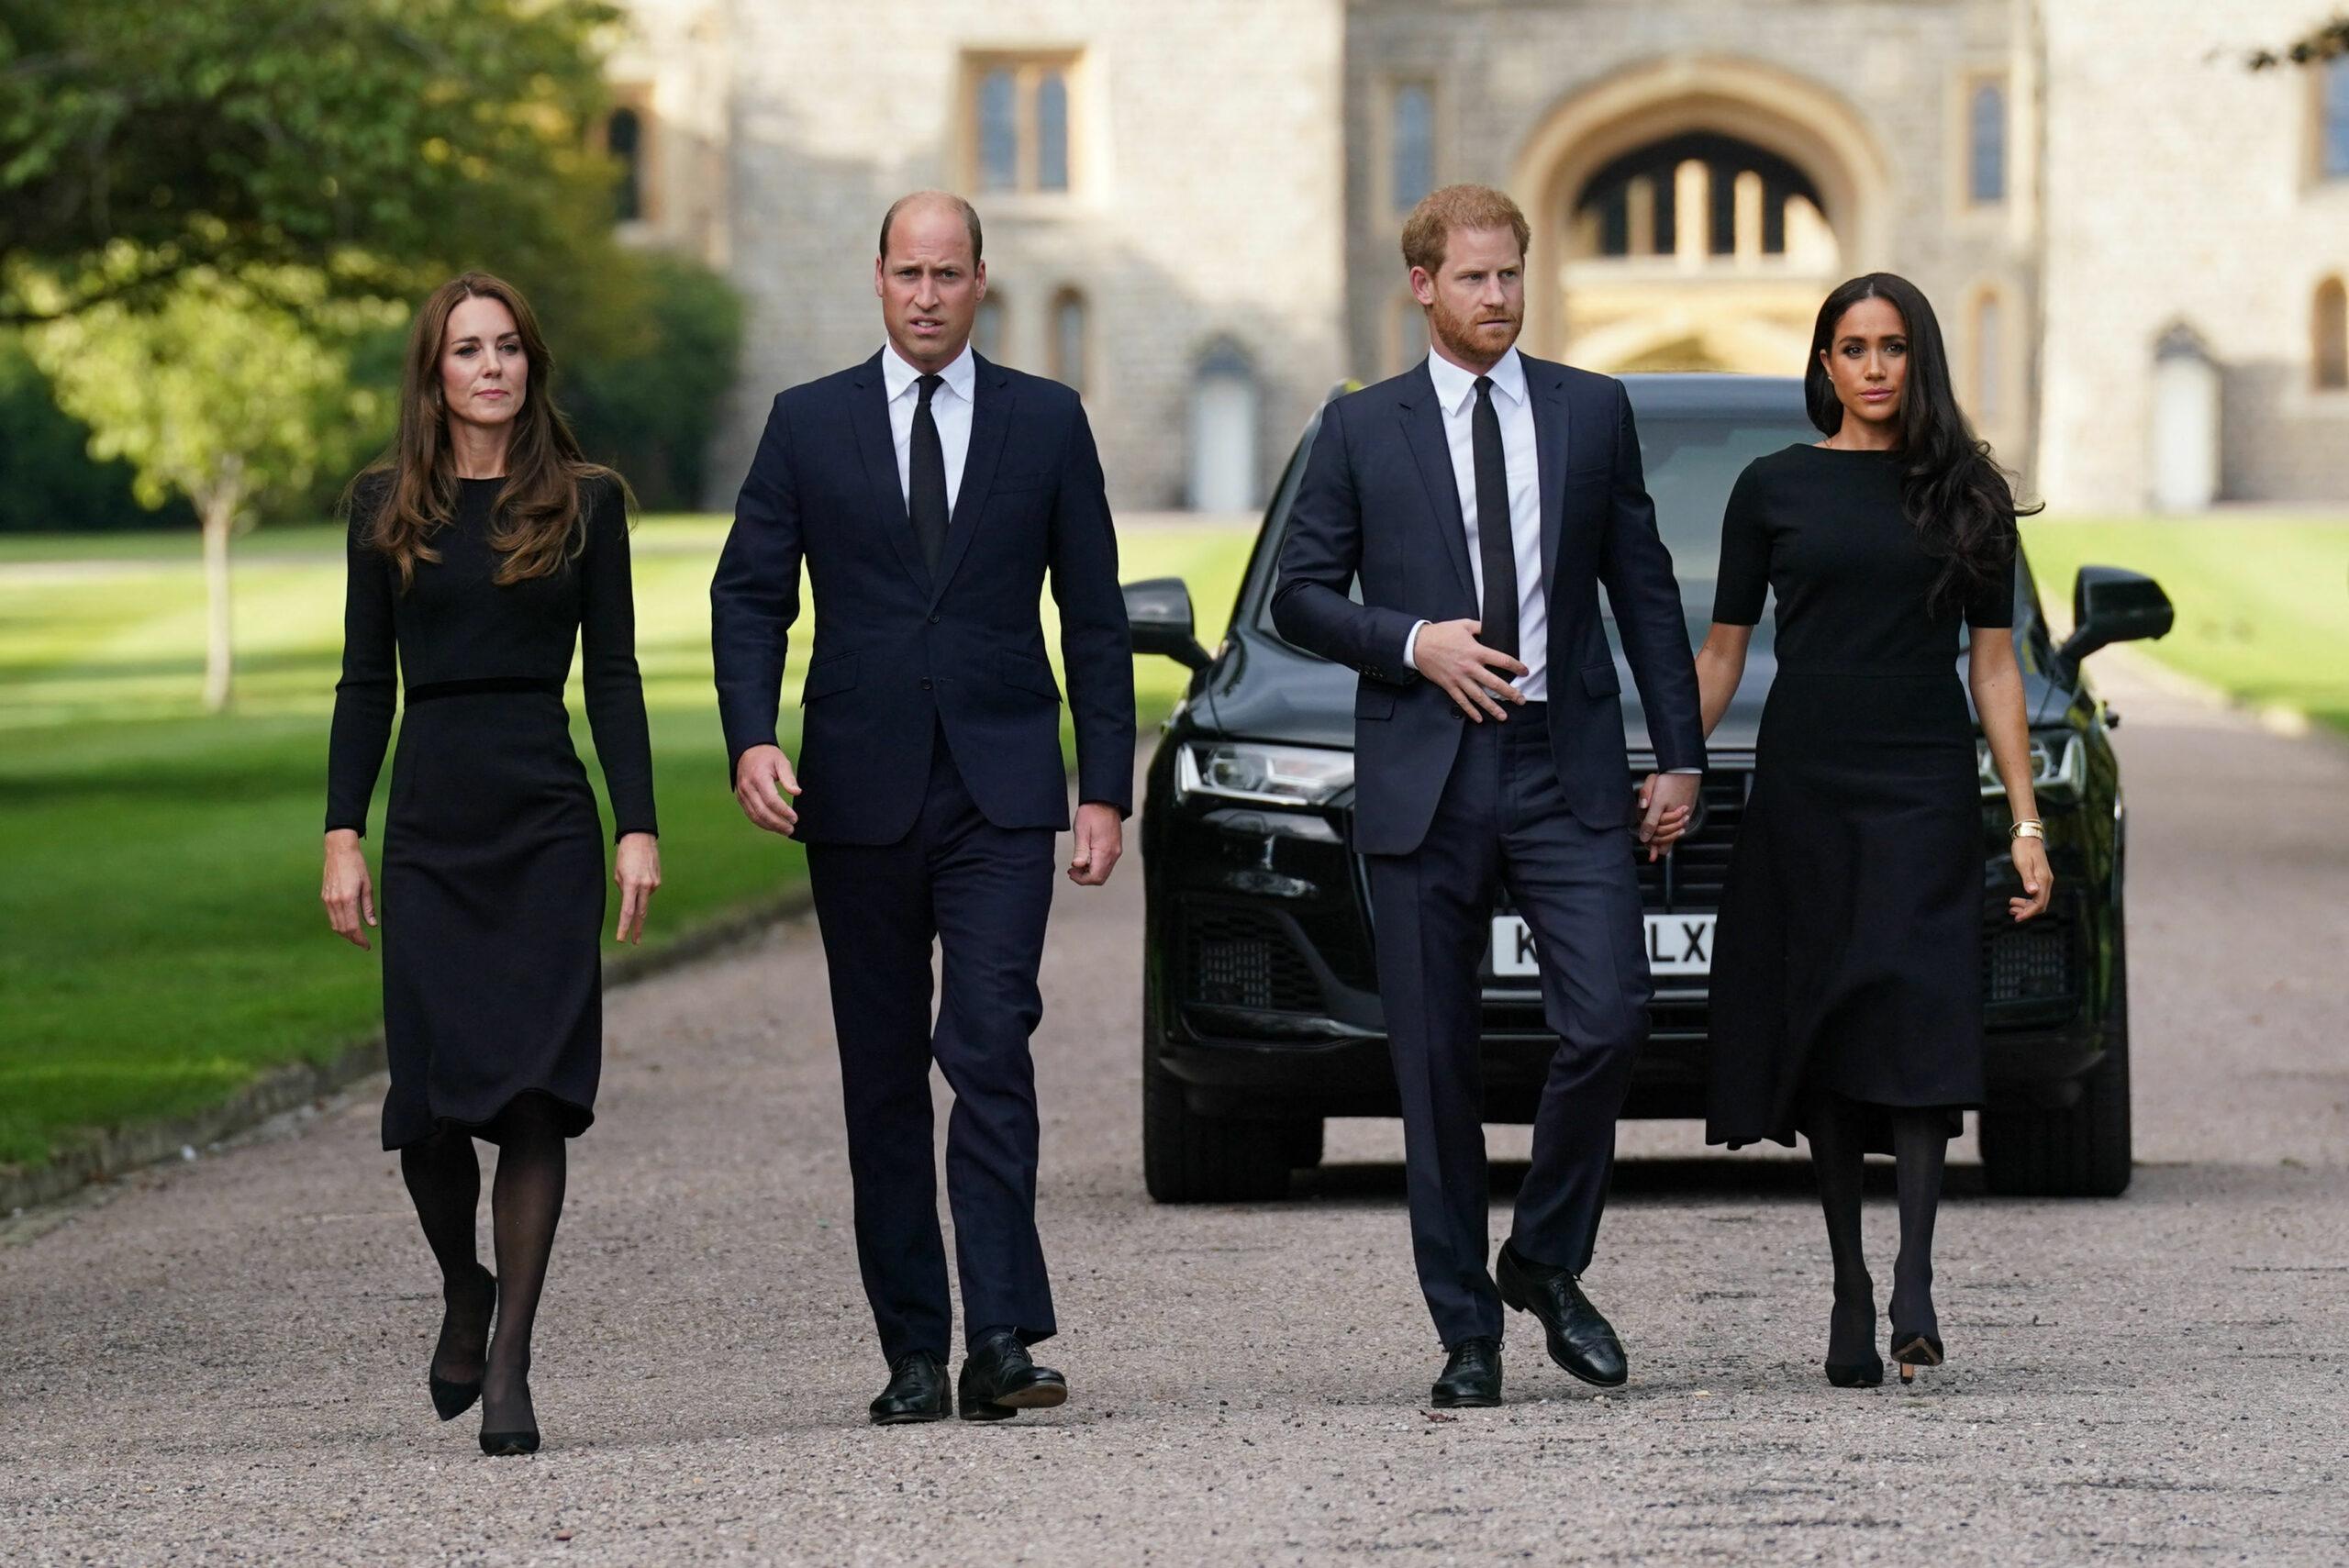 Kate Middleton, Prince William, Prince Harry and Meghan Markle, following the death of Queen Elizabeth II